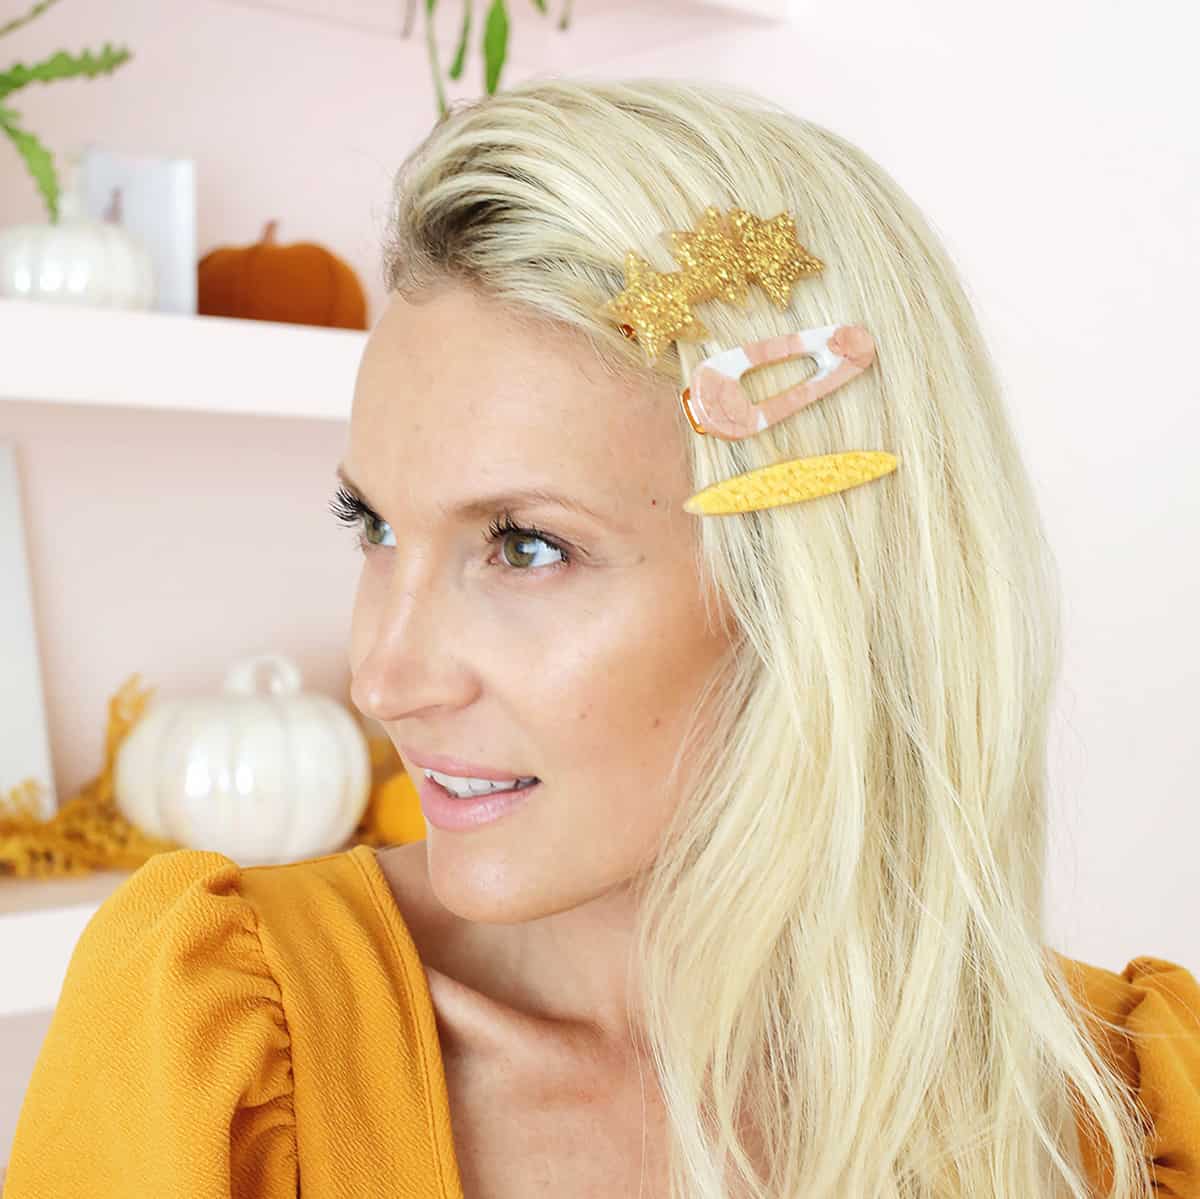 How To Make Statement Hair Clips At Home! - A Beautiful Mess